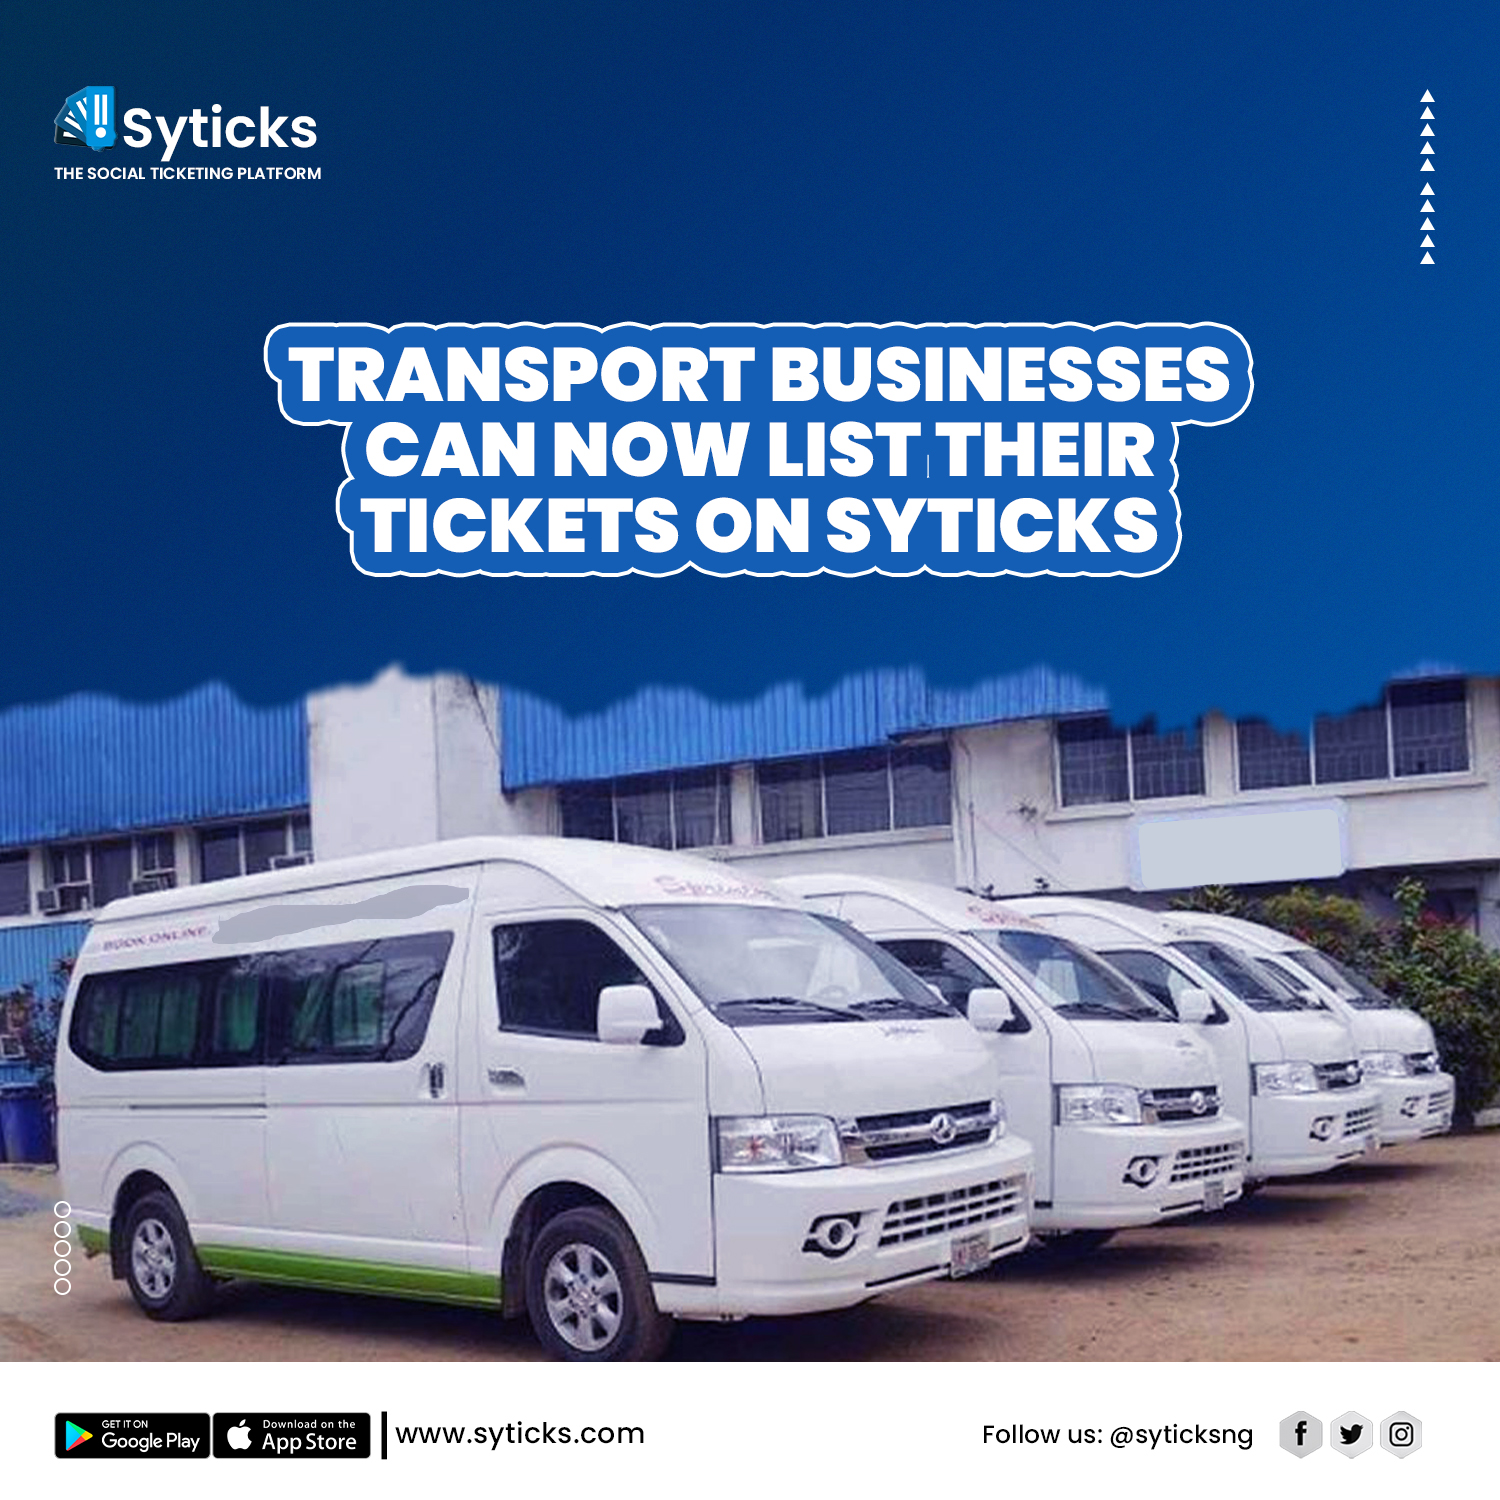 Transport Companies Can Now List Their Tickets on Syticks